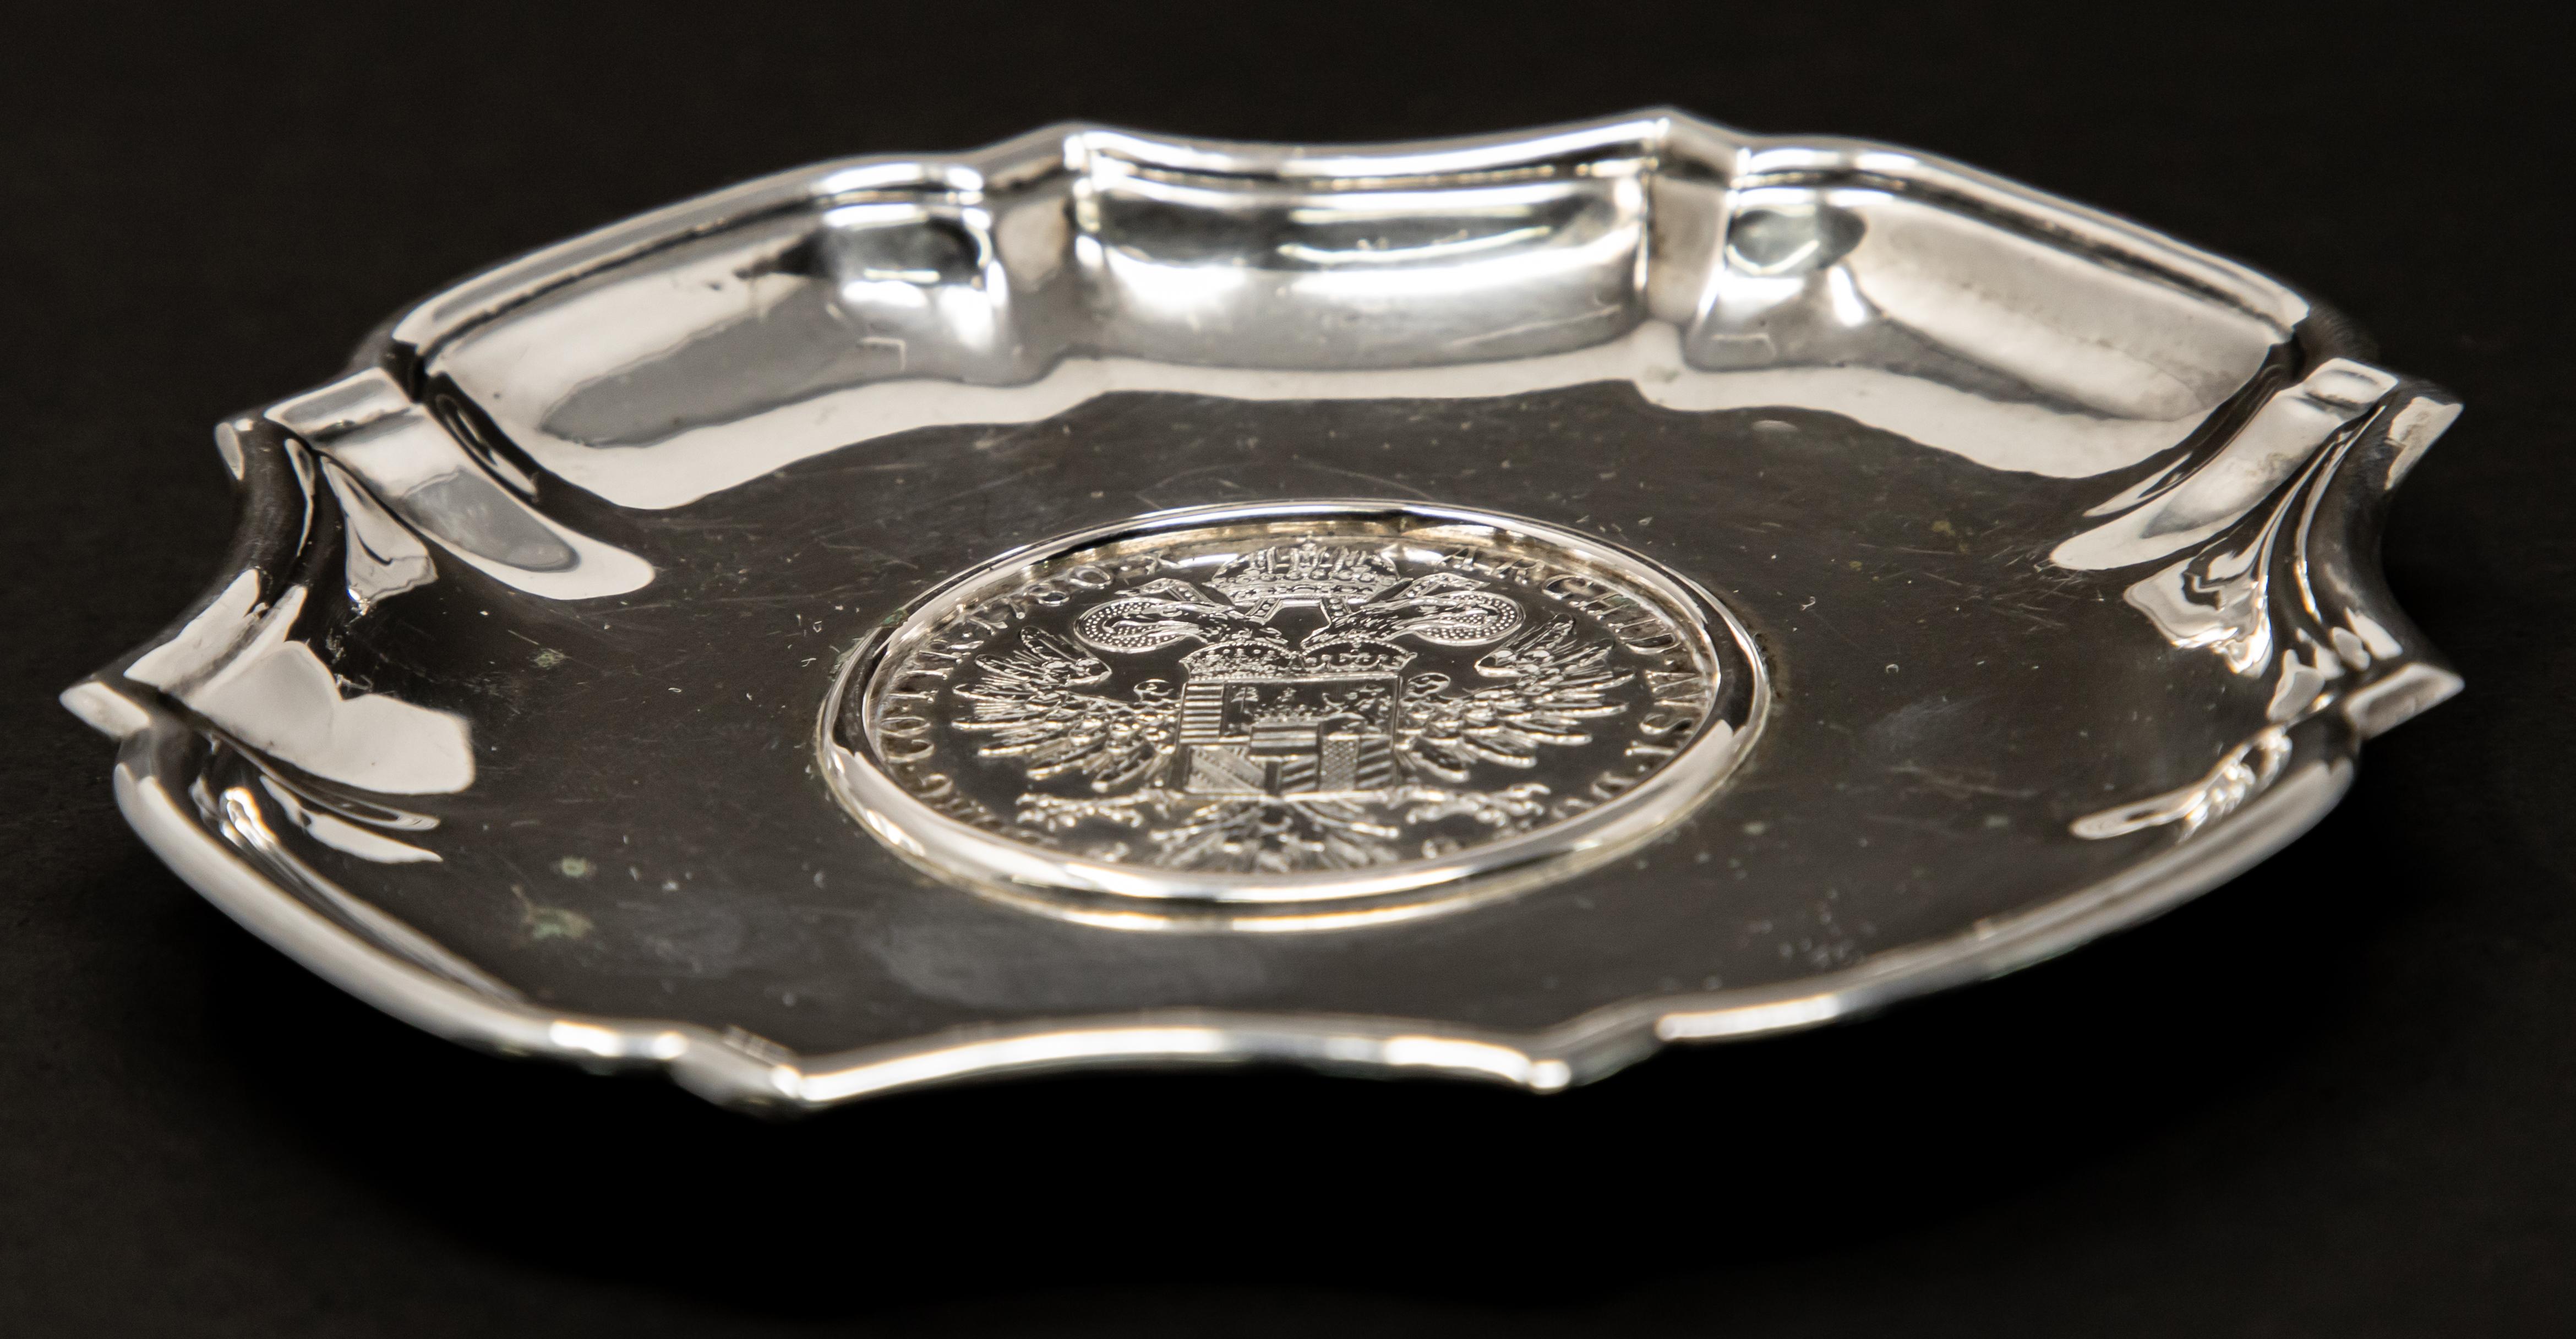 Offering this beautiful Austrian sterling silver dish with a coin center. The coin is marked with BURG-CO-TYR-1780-X, ARCHID-AVST-DUX on one side of the coin and the other side is marked R-IMP-HU-BO-REG, M. THERESIA.D.G. And under the bust is marked